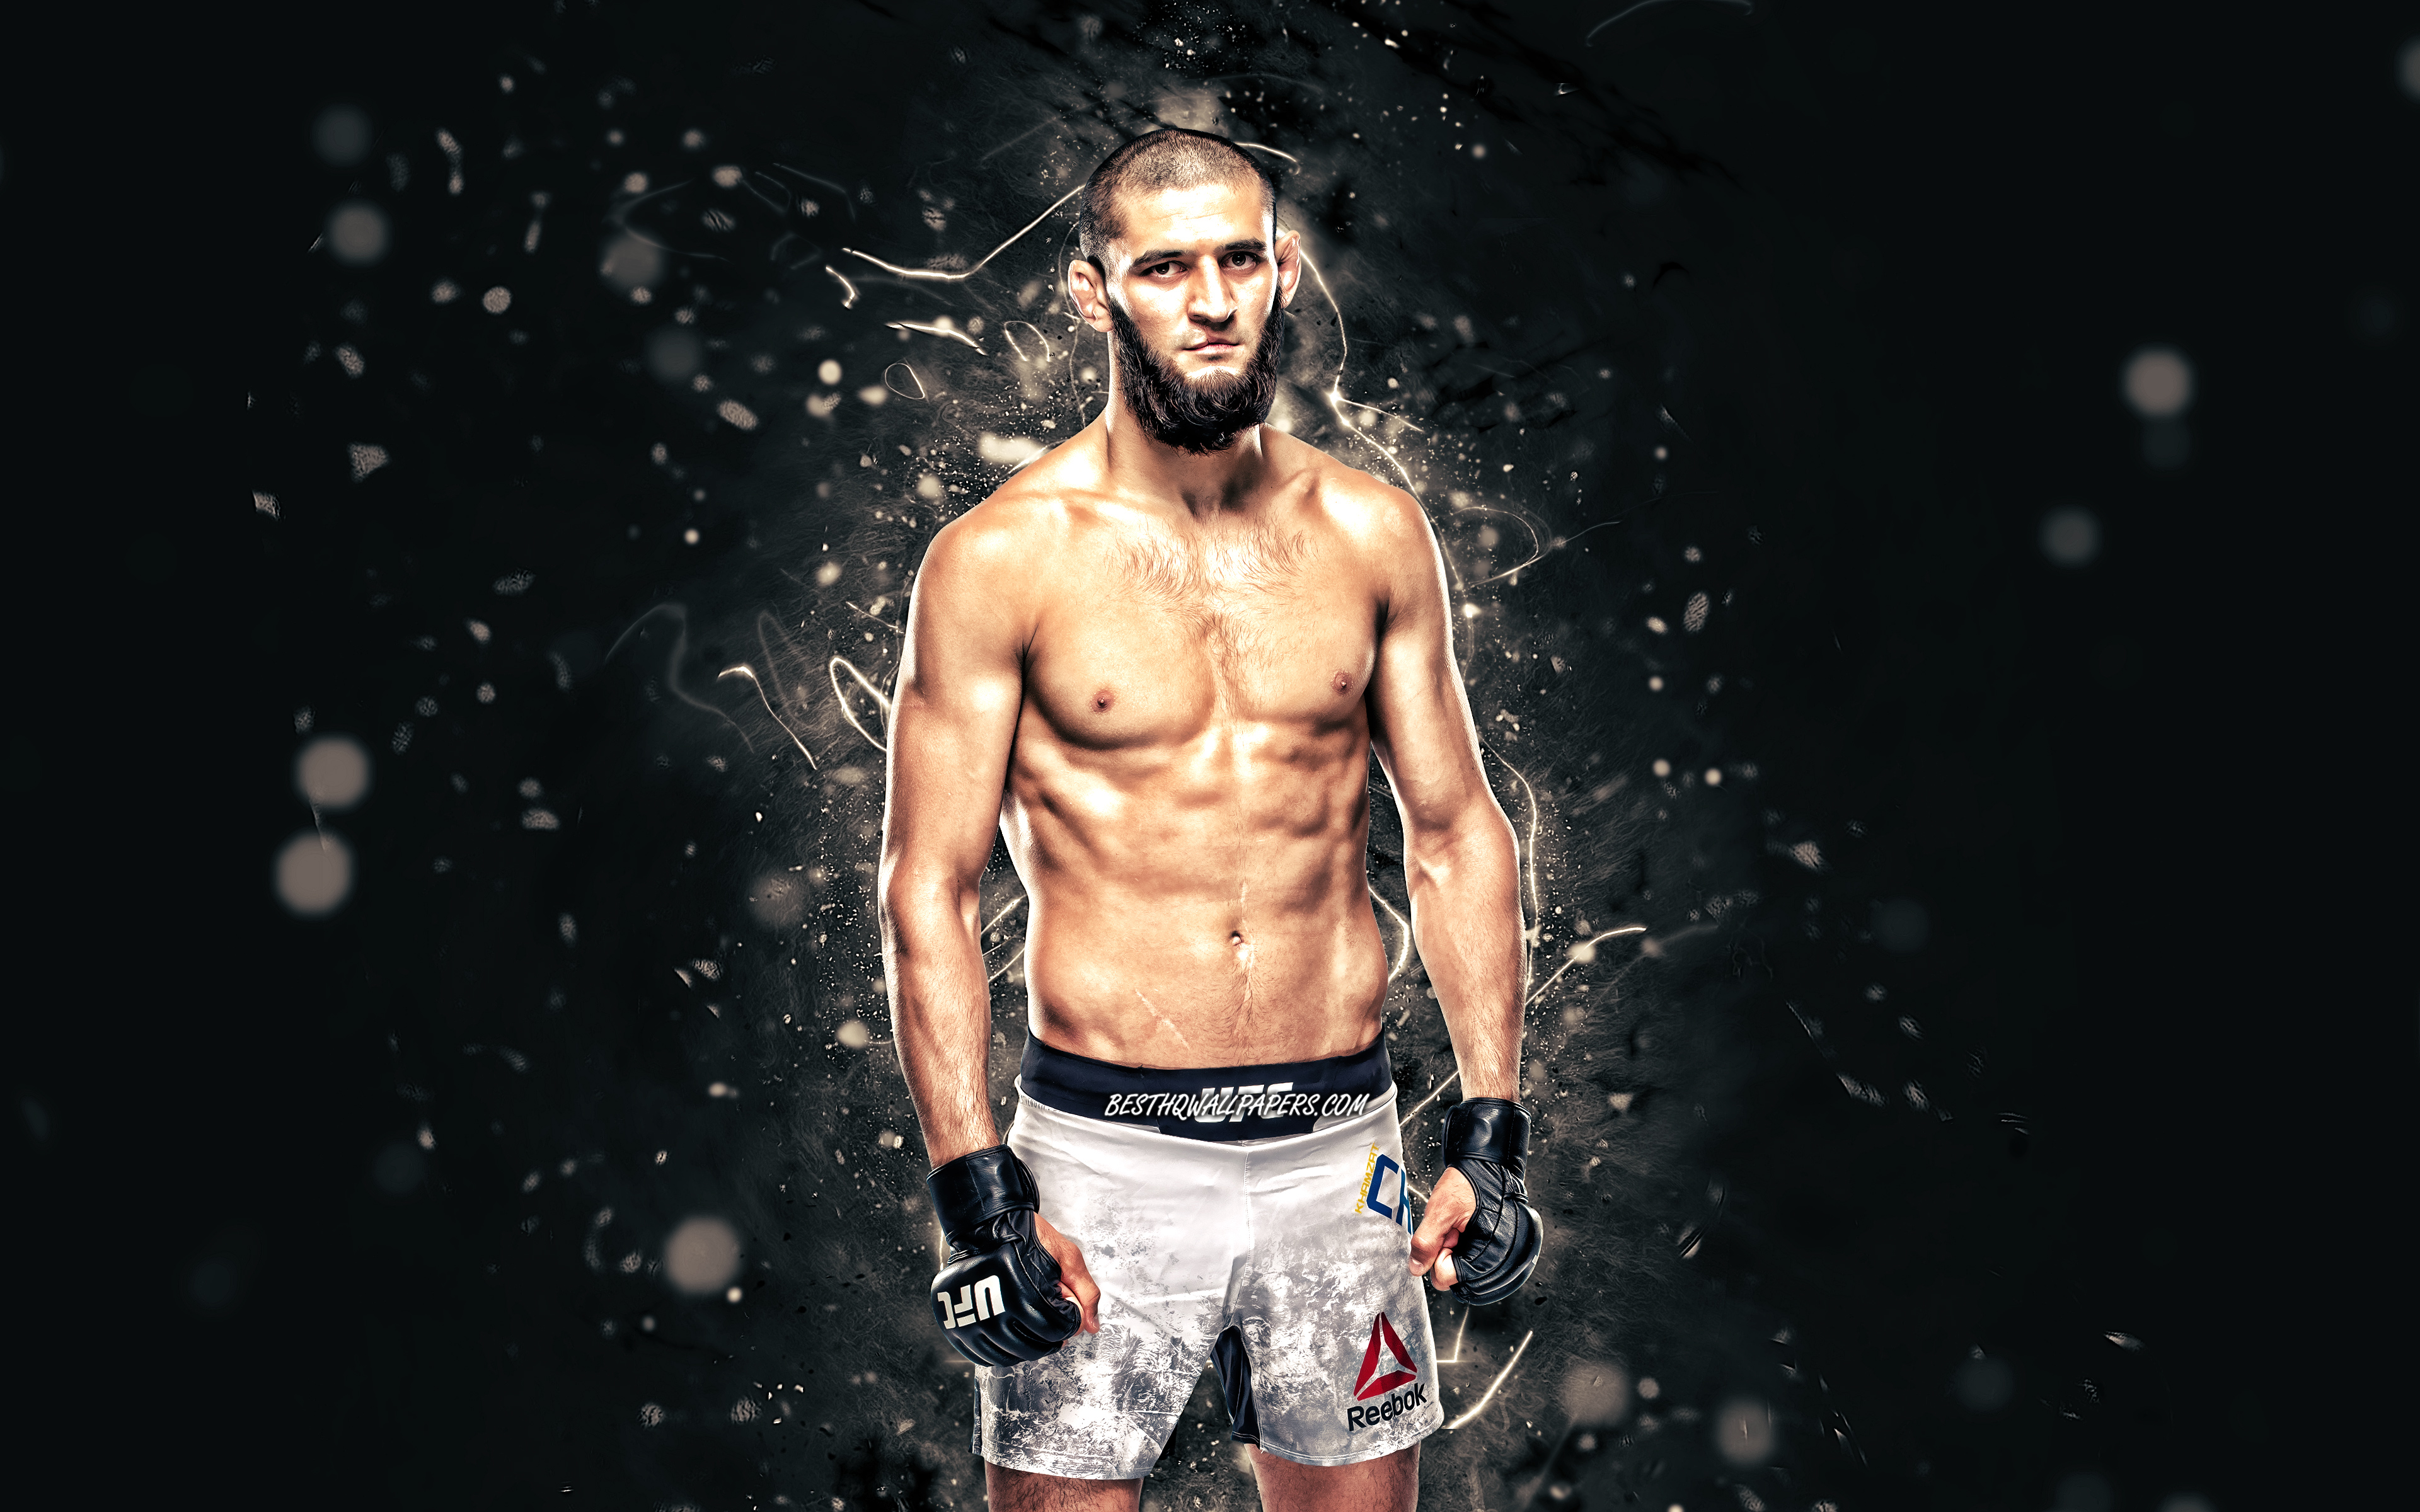 Download wallpaper Khamzat Chimaev, 4k, white neon lights, Swedish fighters, MMA, UFC, Mixed martial arts, Khamzat Chimaev 4K, UFC fighters, MMA fighters for desktop with resolution 3840x2400. High Quality HD picture wallpaper